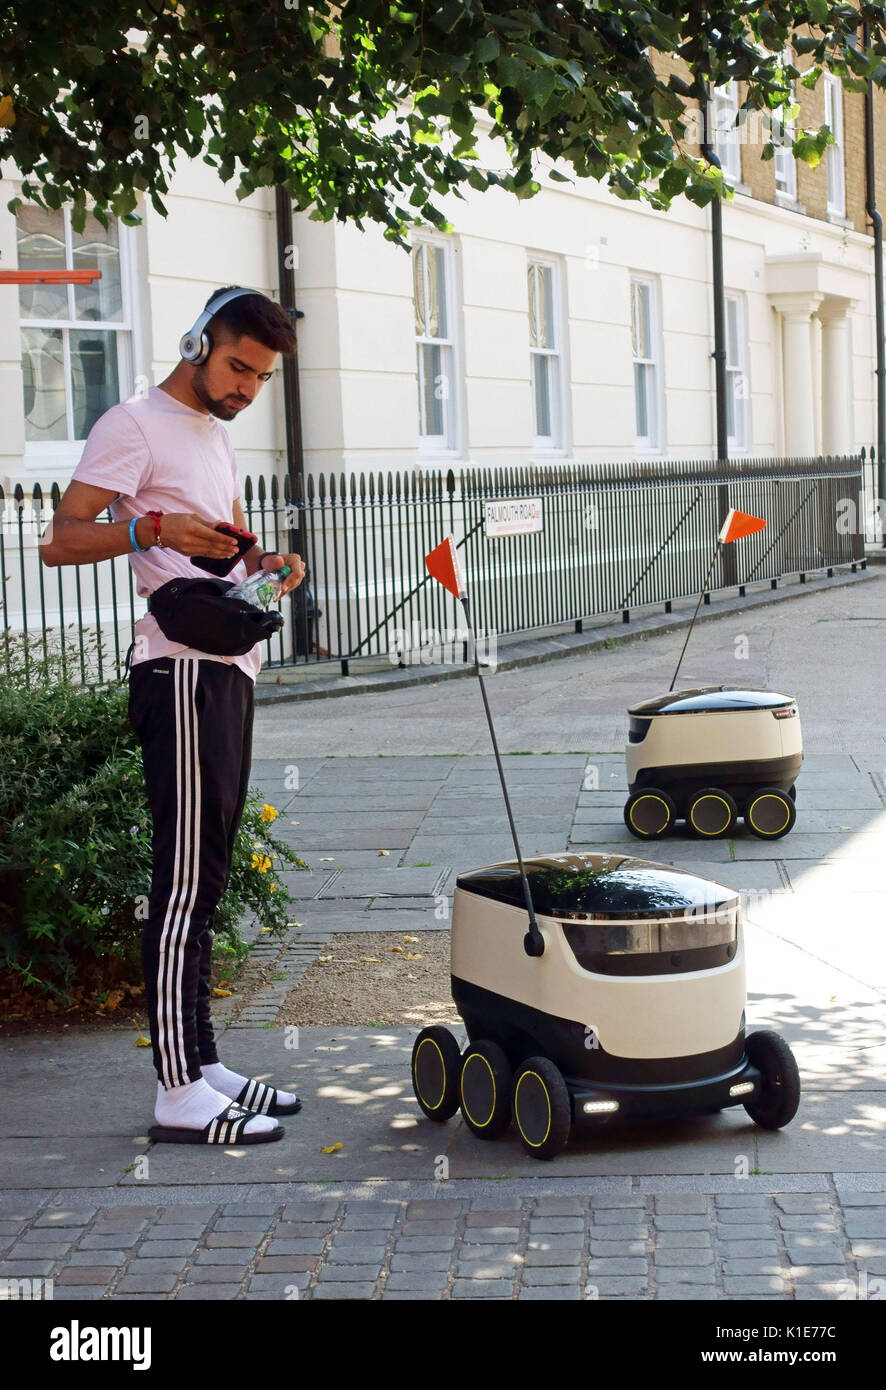 Borough, London, UK. 25th Aug, 2017. Food delivery robots made by Starship Technologies have gone on trial in London. The six-wheeled autonmous vehicles are being prepared to undertake take-out home deliveries for two major food outlets. At present they are accompanied by human handlers. Please credit pictures by (C) Credit: Jeffrey Blackler/Alamy Live News Stock Photo